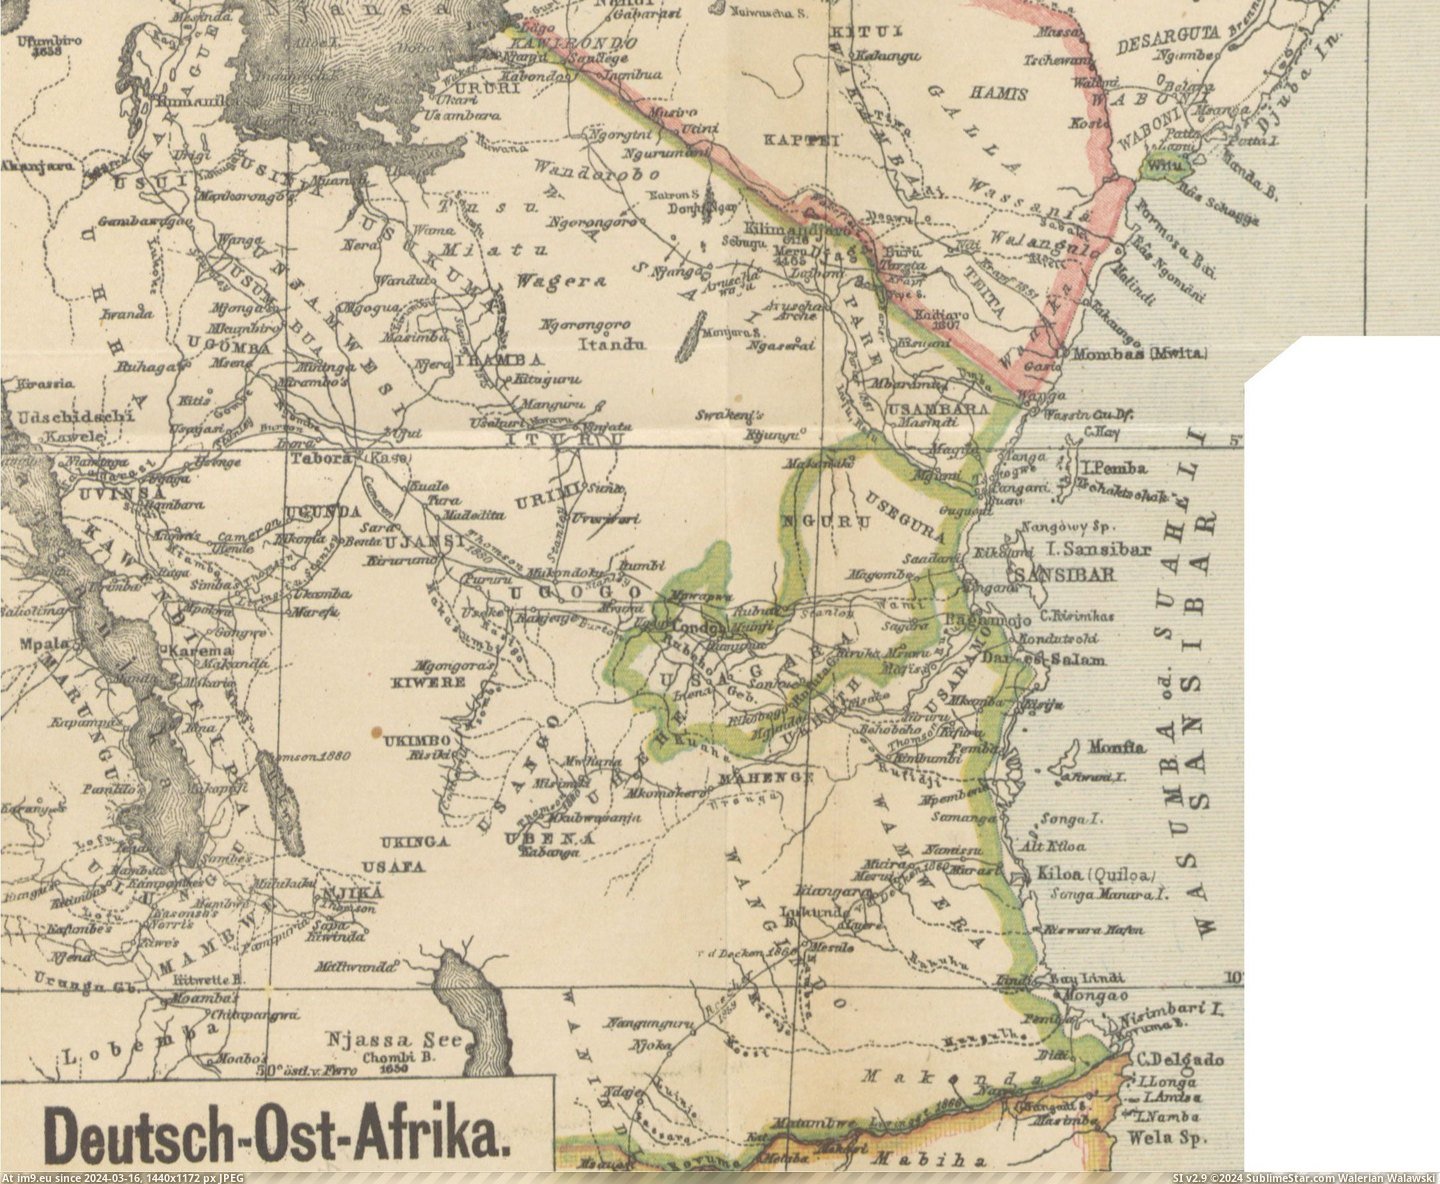 #People #Non #Country #East #Description #Colonies #Germany #Africa #German [Mapporn] German East Africa (Deutsh-Ost-Afrika) from Germany's colonies, Brief description of the country and people of our non Pic. (Bild von album My r/MAPS favs))